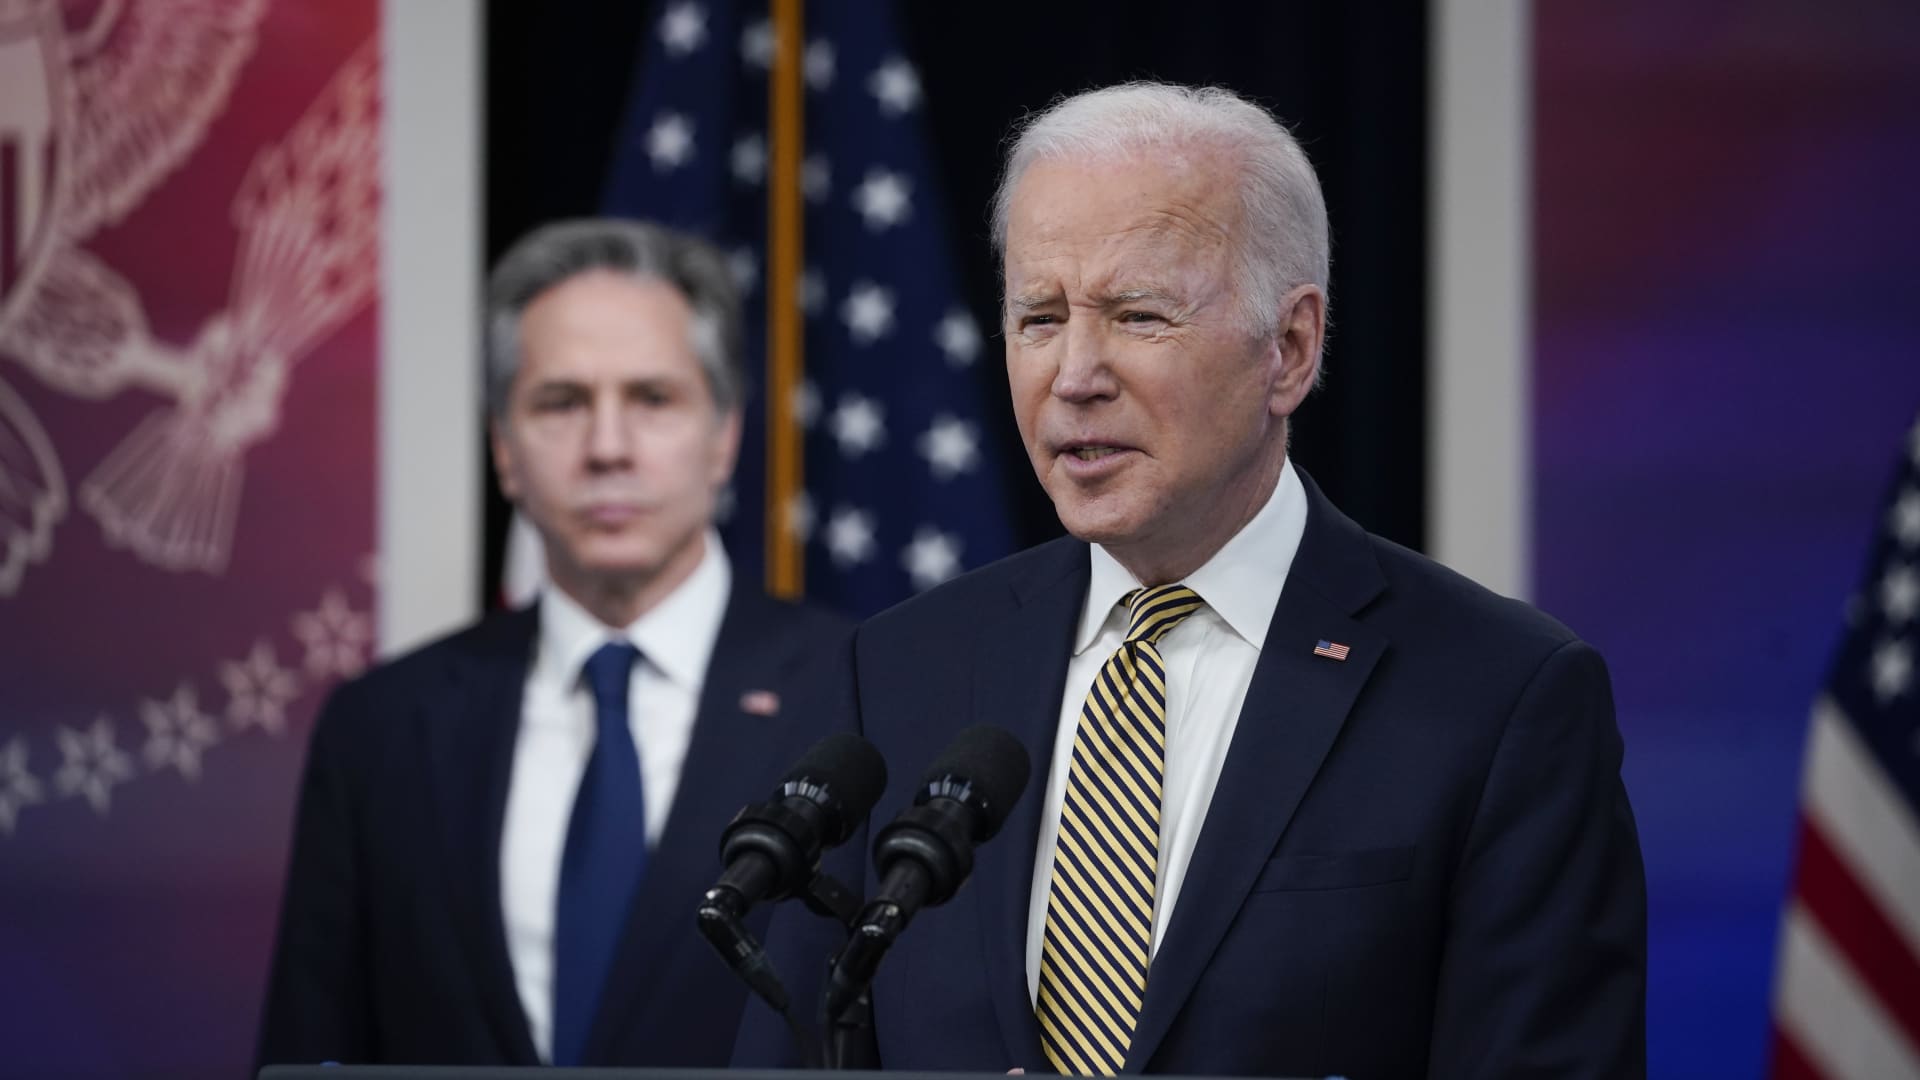 Biden details new aid to Ukraine, promises "more in the days and weeks ahead" to help combat Russia invasion